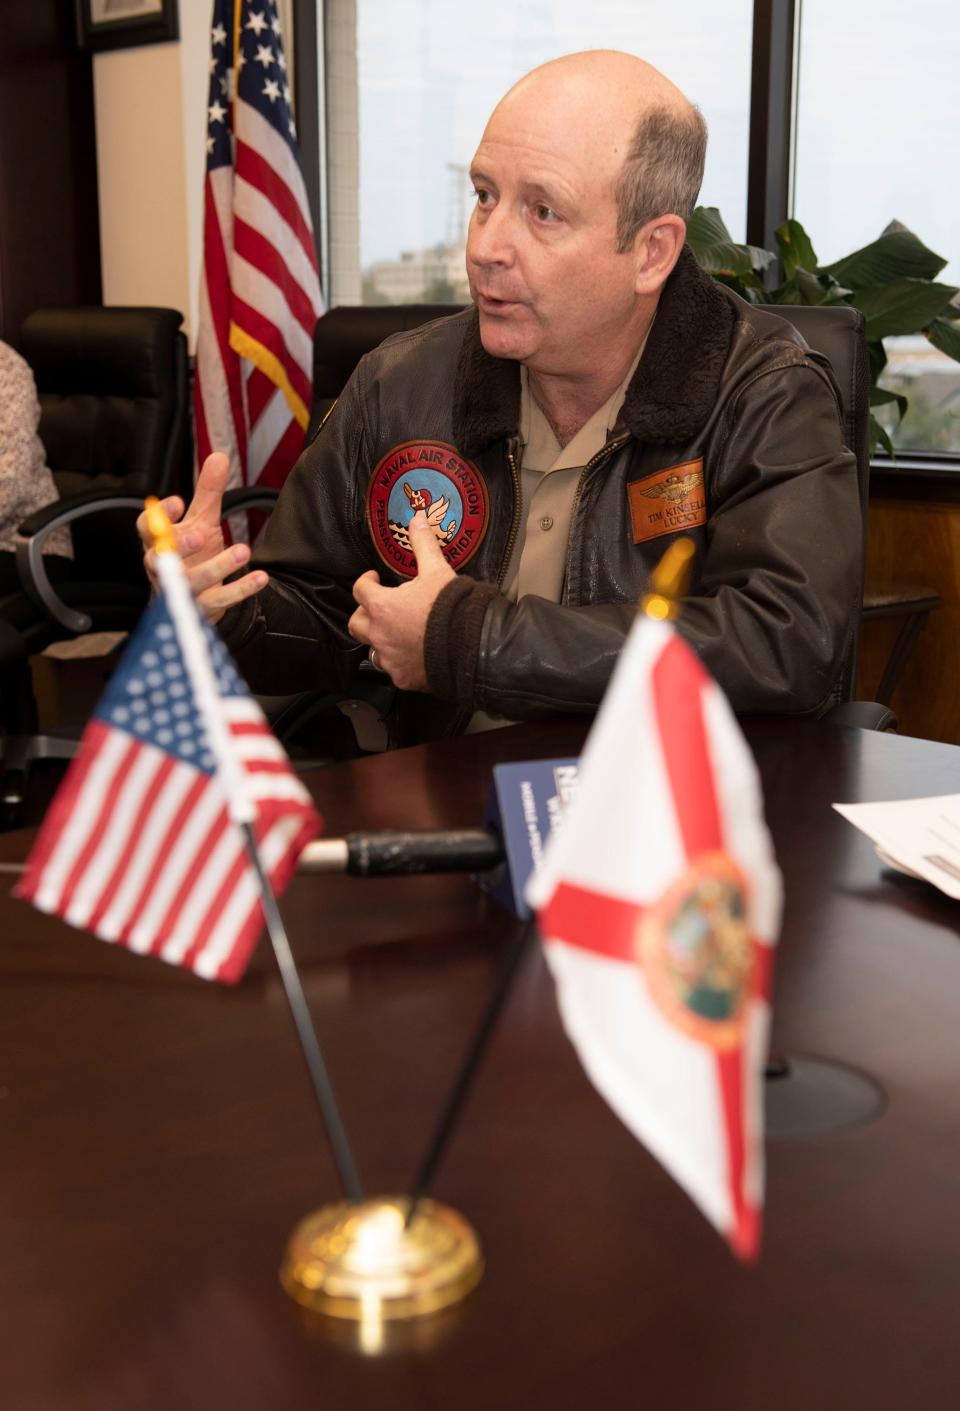 Capt. Tim Kinsella, commanding officer at NAS Pensacola, talks Wednesday, Jan. 5, 2022, about plans to reopen the base to the general public during a press conference at state Sen. Doug Broxson's office in downtown Pensacola.